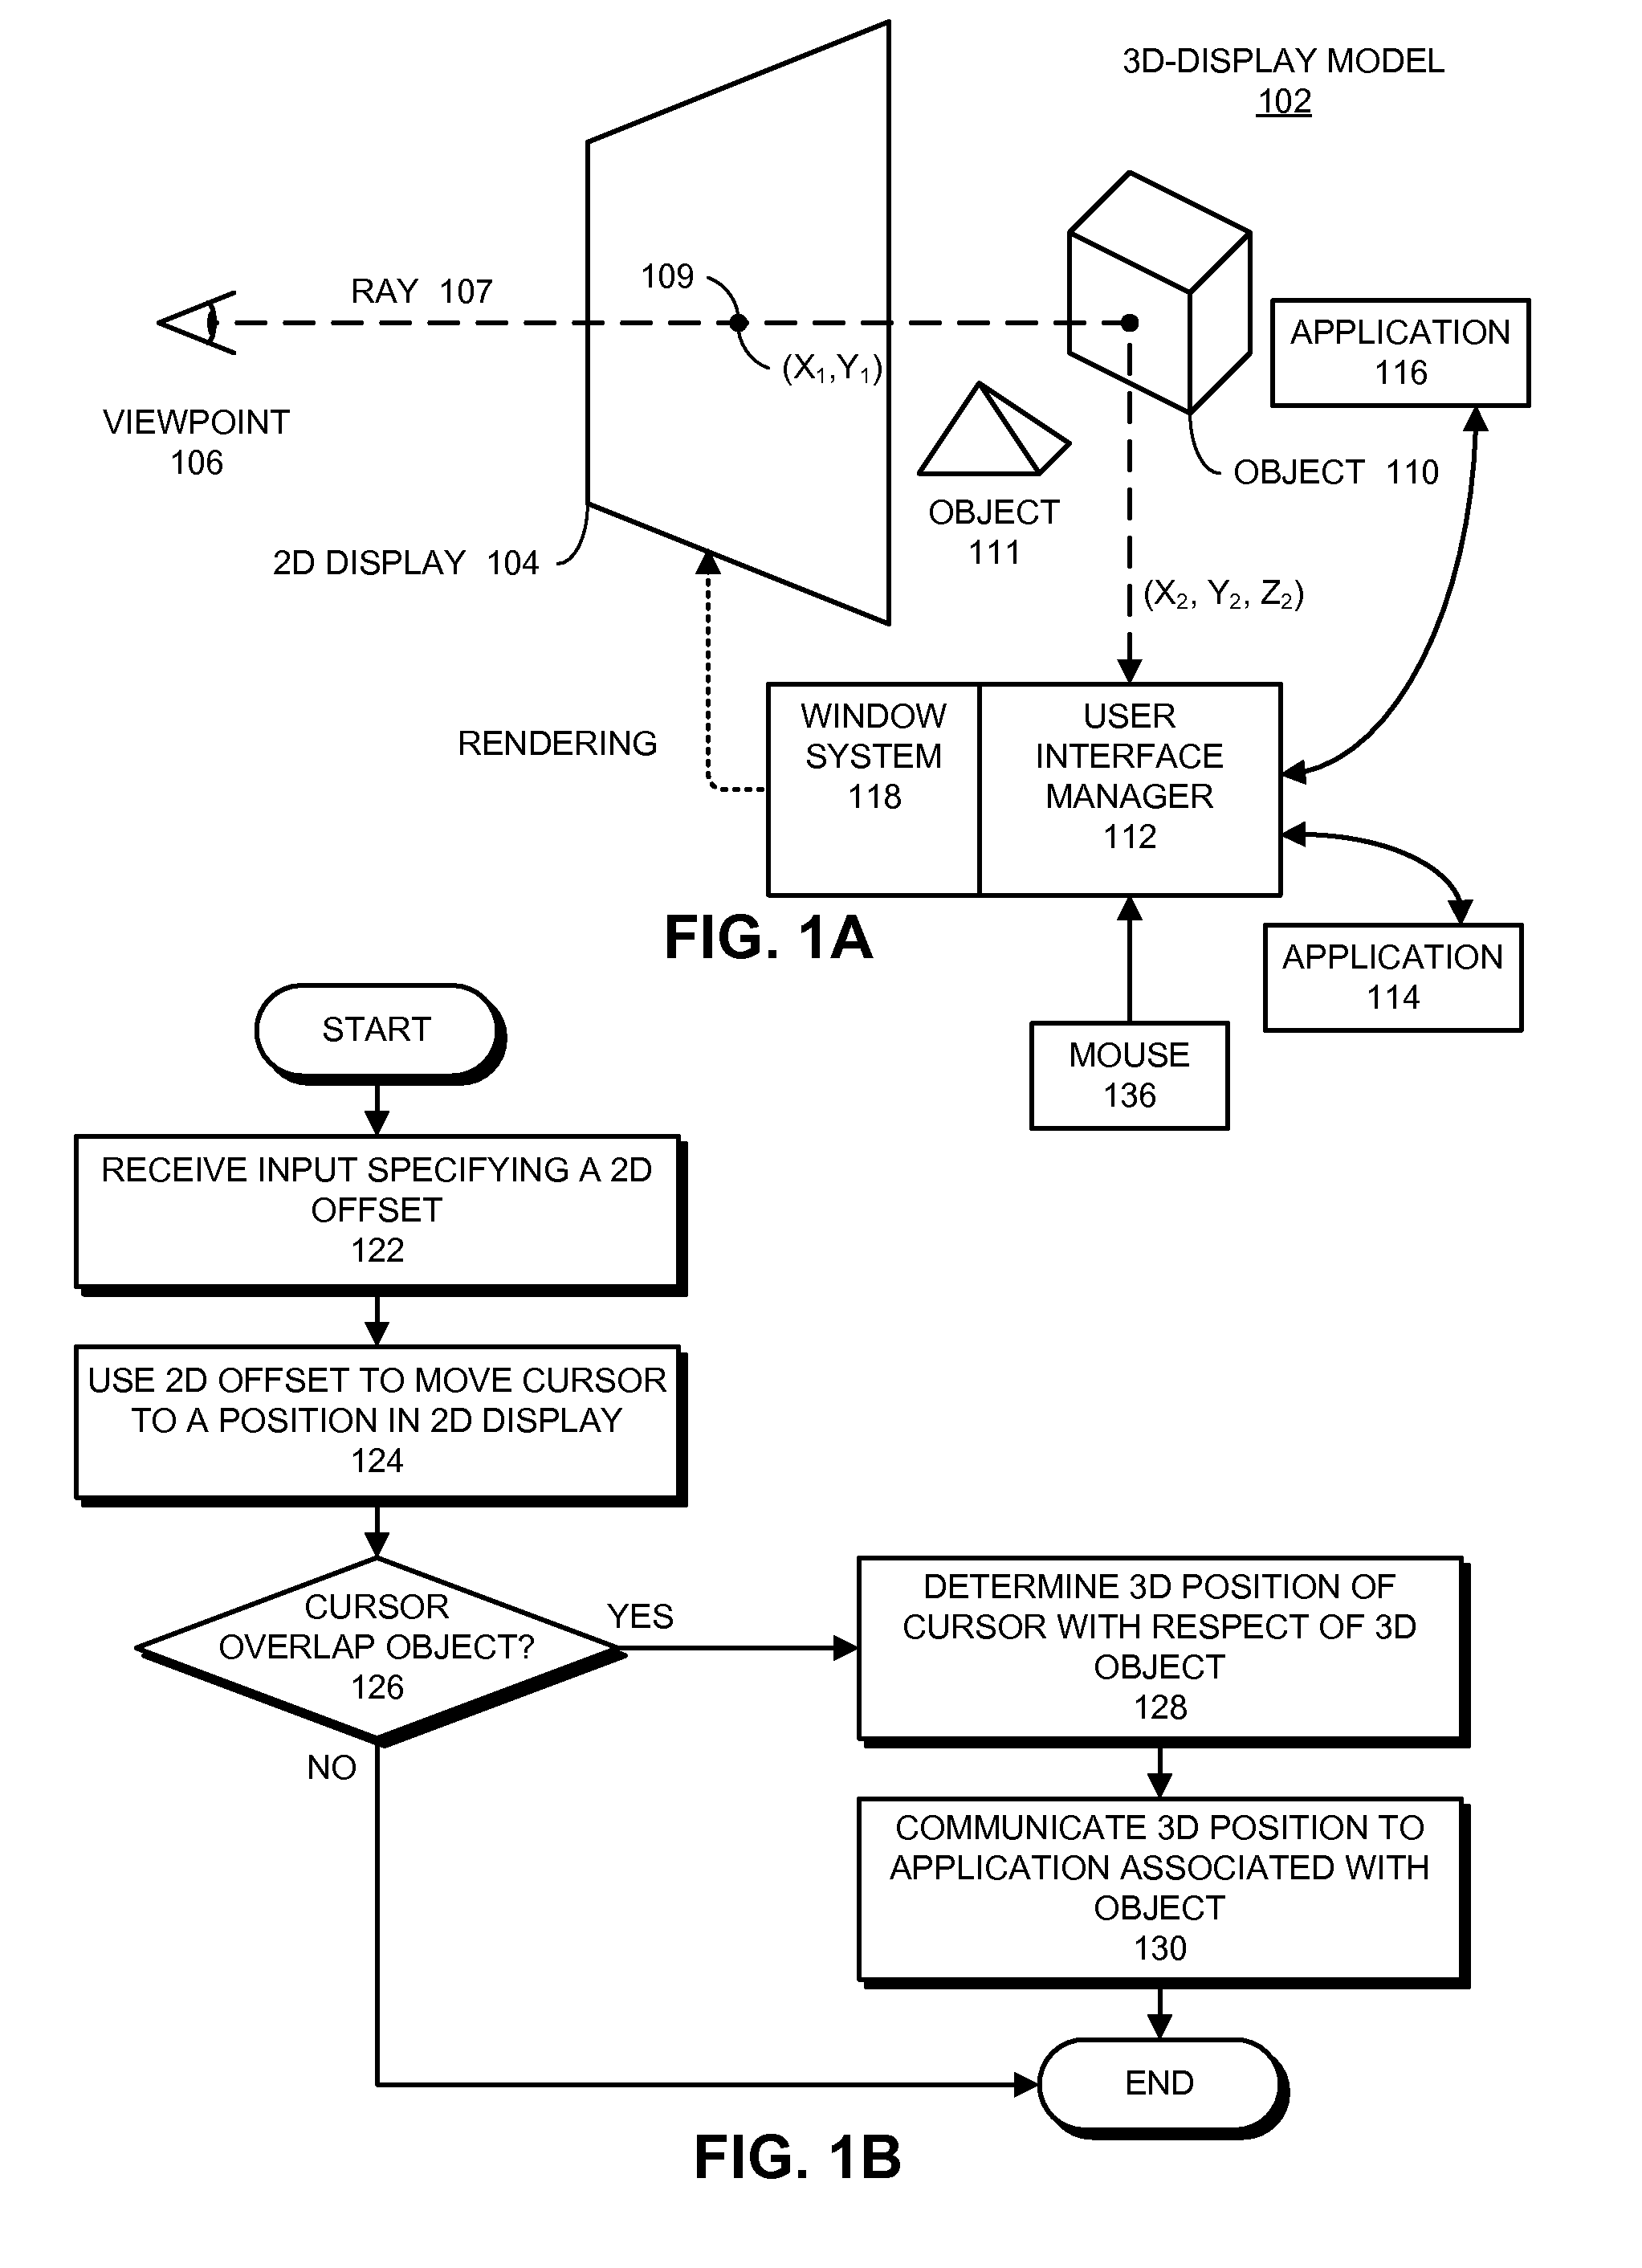 Method and apparatus for implementing a scene-graph-aware user interface manager